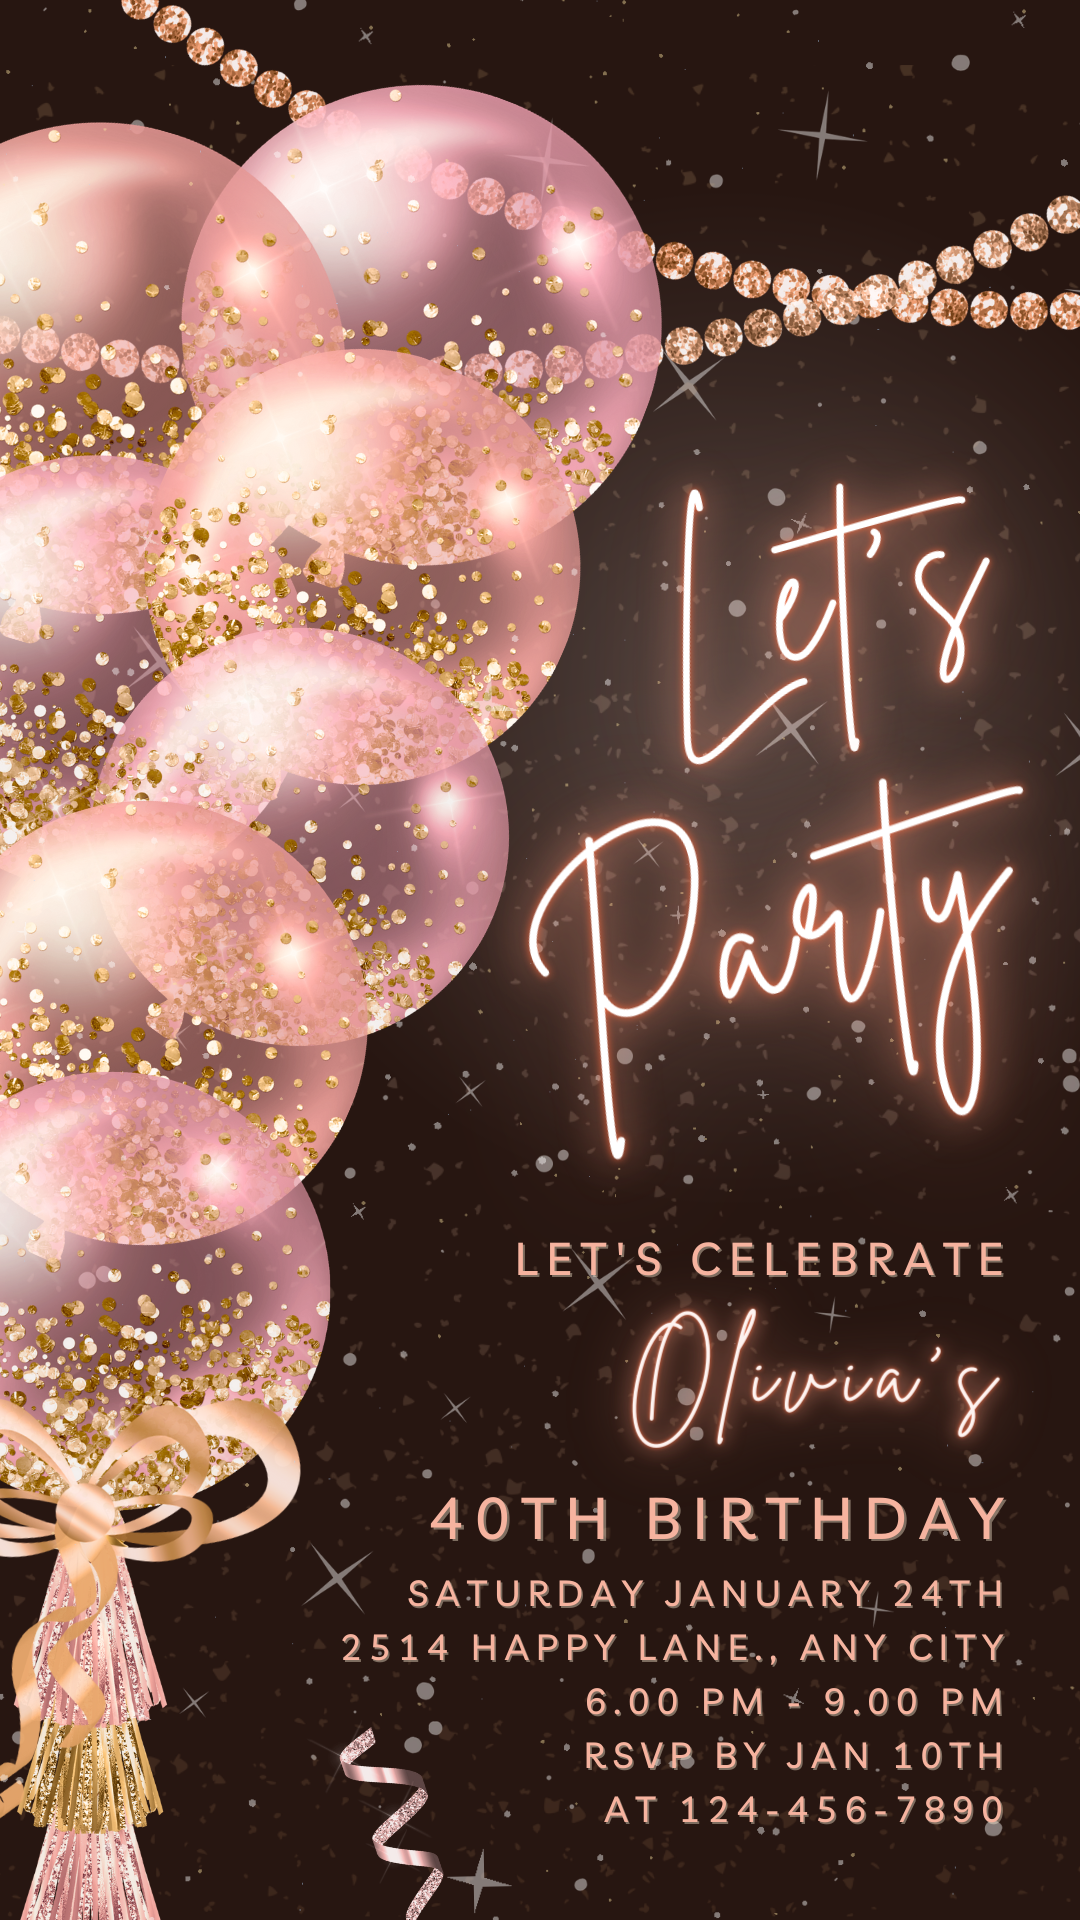 Let's Party Animated Invite for any Event Celebration, Editable Video Template, Birthday invitation for any Age | Rosegold Party E-vite